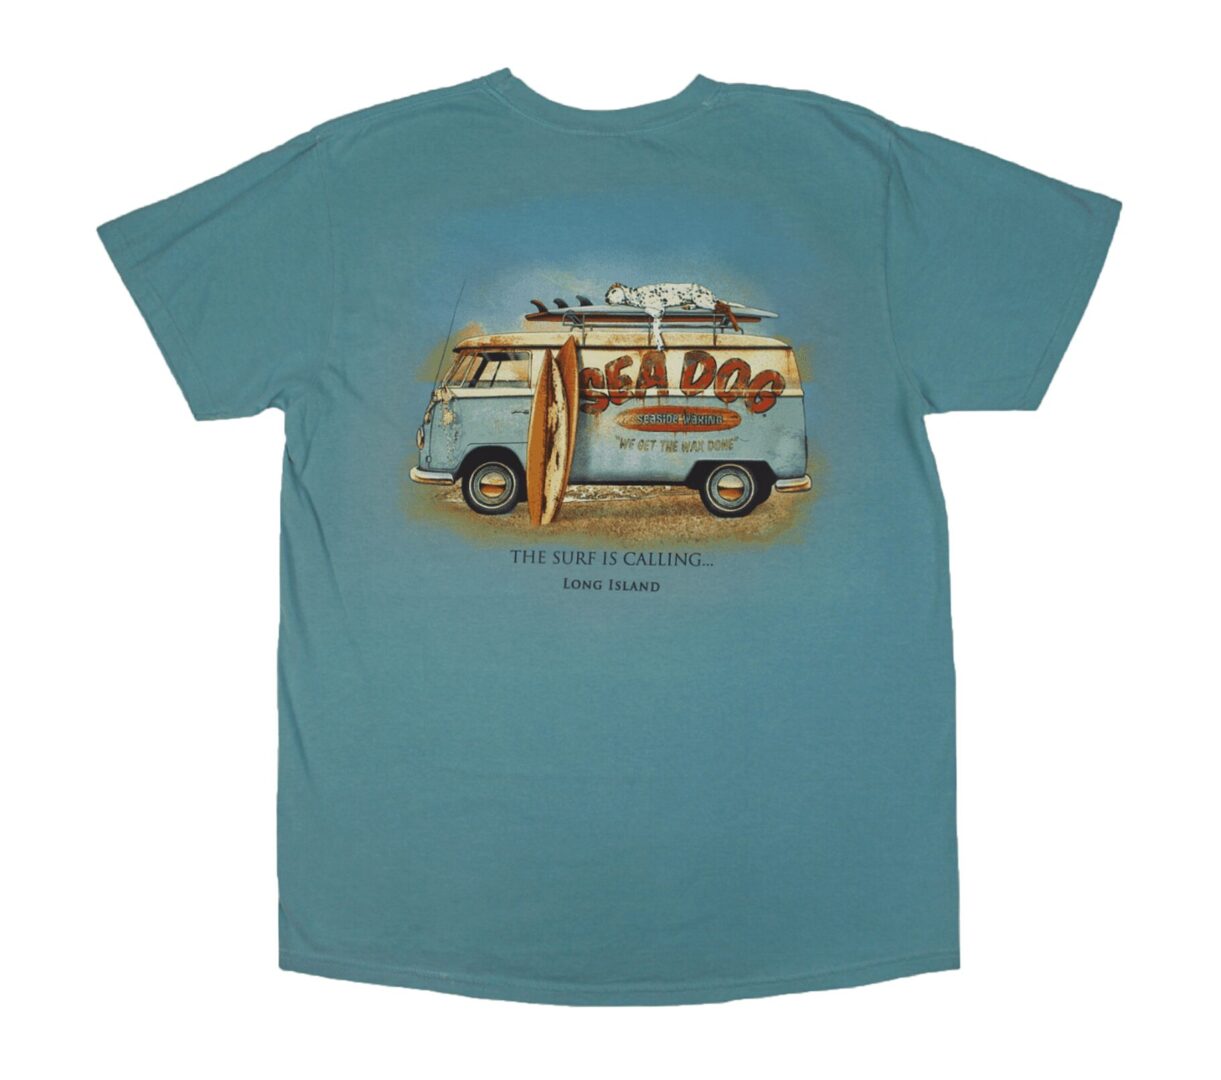 a seafoam color tee with a vw type of bus facing left with a surfboard leaning against the side of the front side door. a dalmation dog lays sleeping on the top of the van with the words sea dog across the body of the van. the words 'the surf is calling' is below the van with the words 'long island' below that.